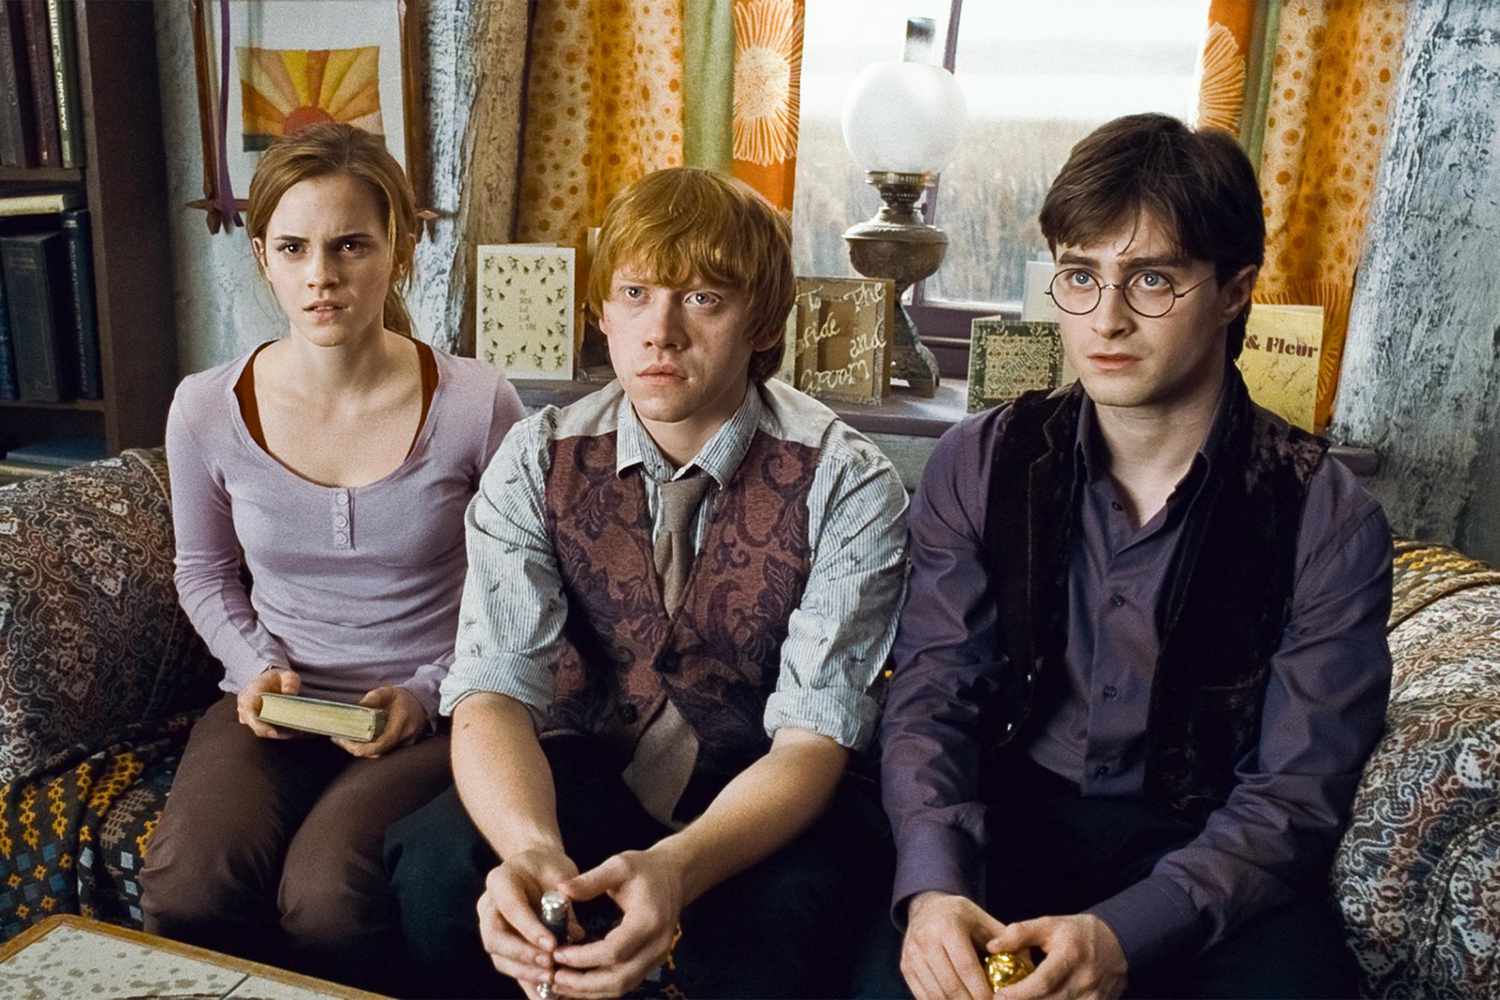 Harry Potter and the Deathly Hallows: Part I (2010) (L-r) EMMA WATSON as Hermione Granger, RUPERT GRINT as Ron Weasley and DANIEL RADCLIFFE as Harry Potter Courtesy Warner Bros.